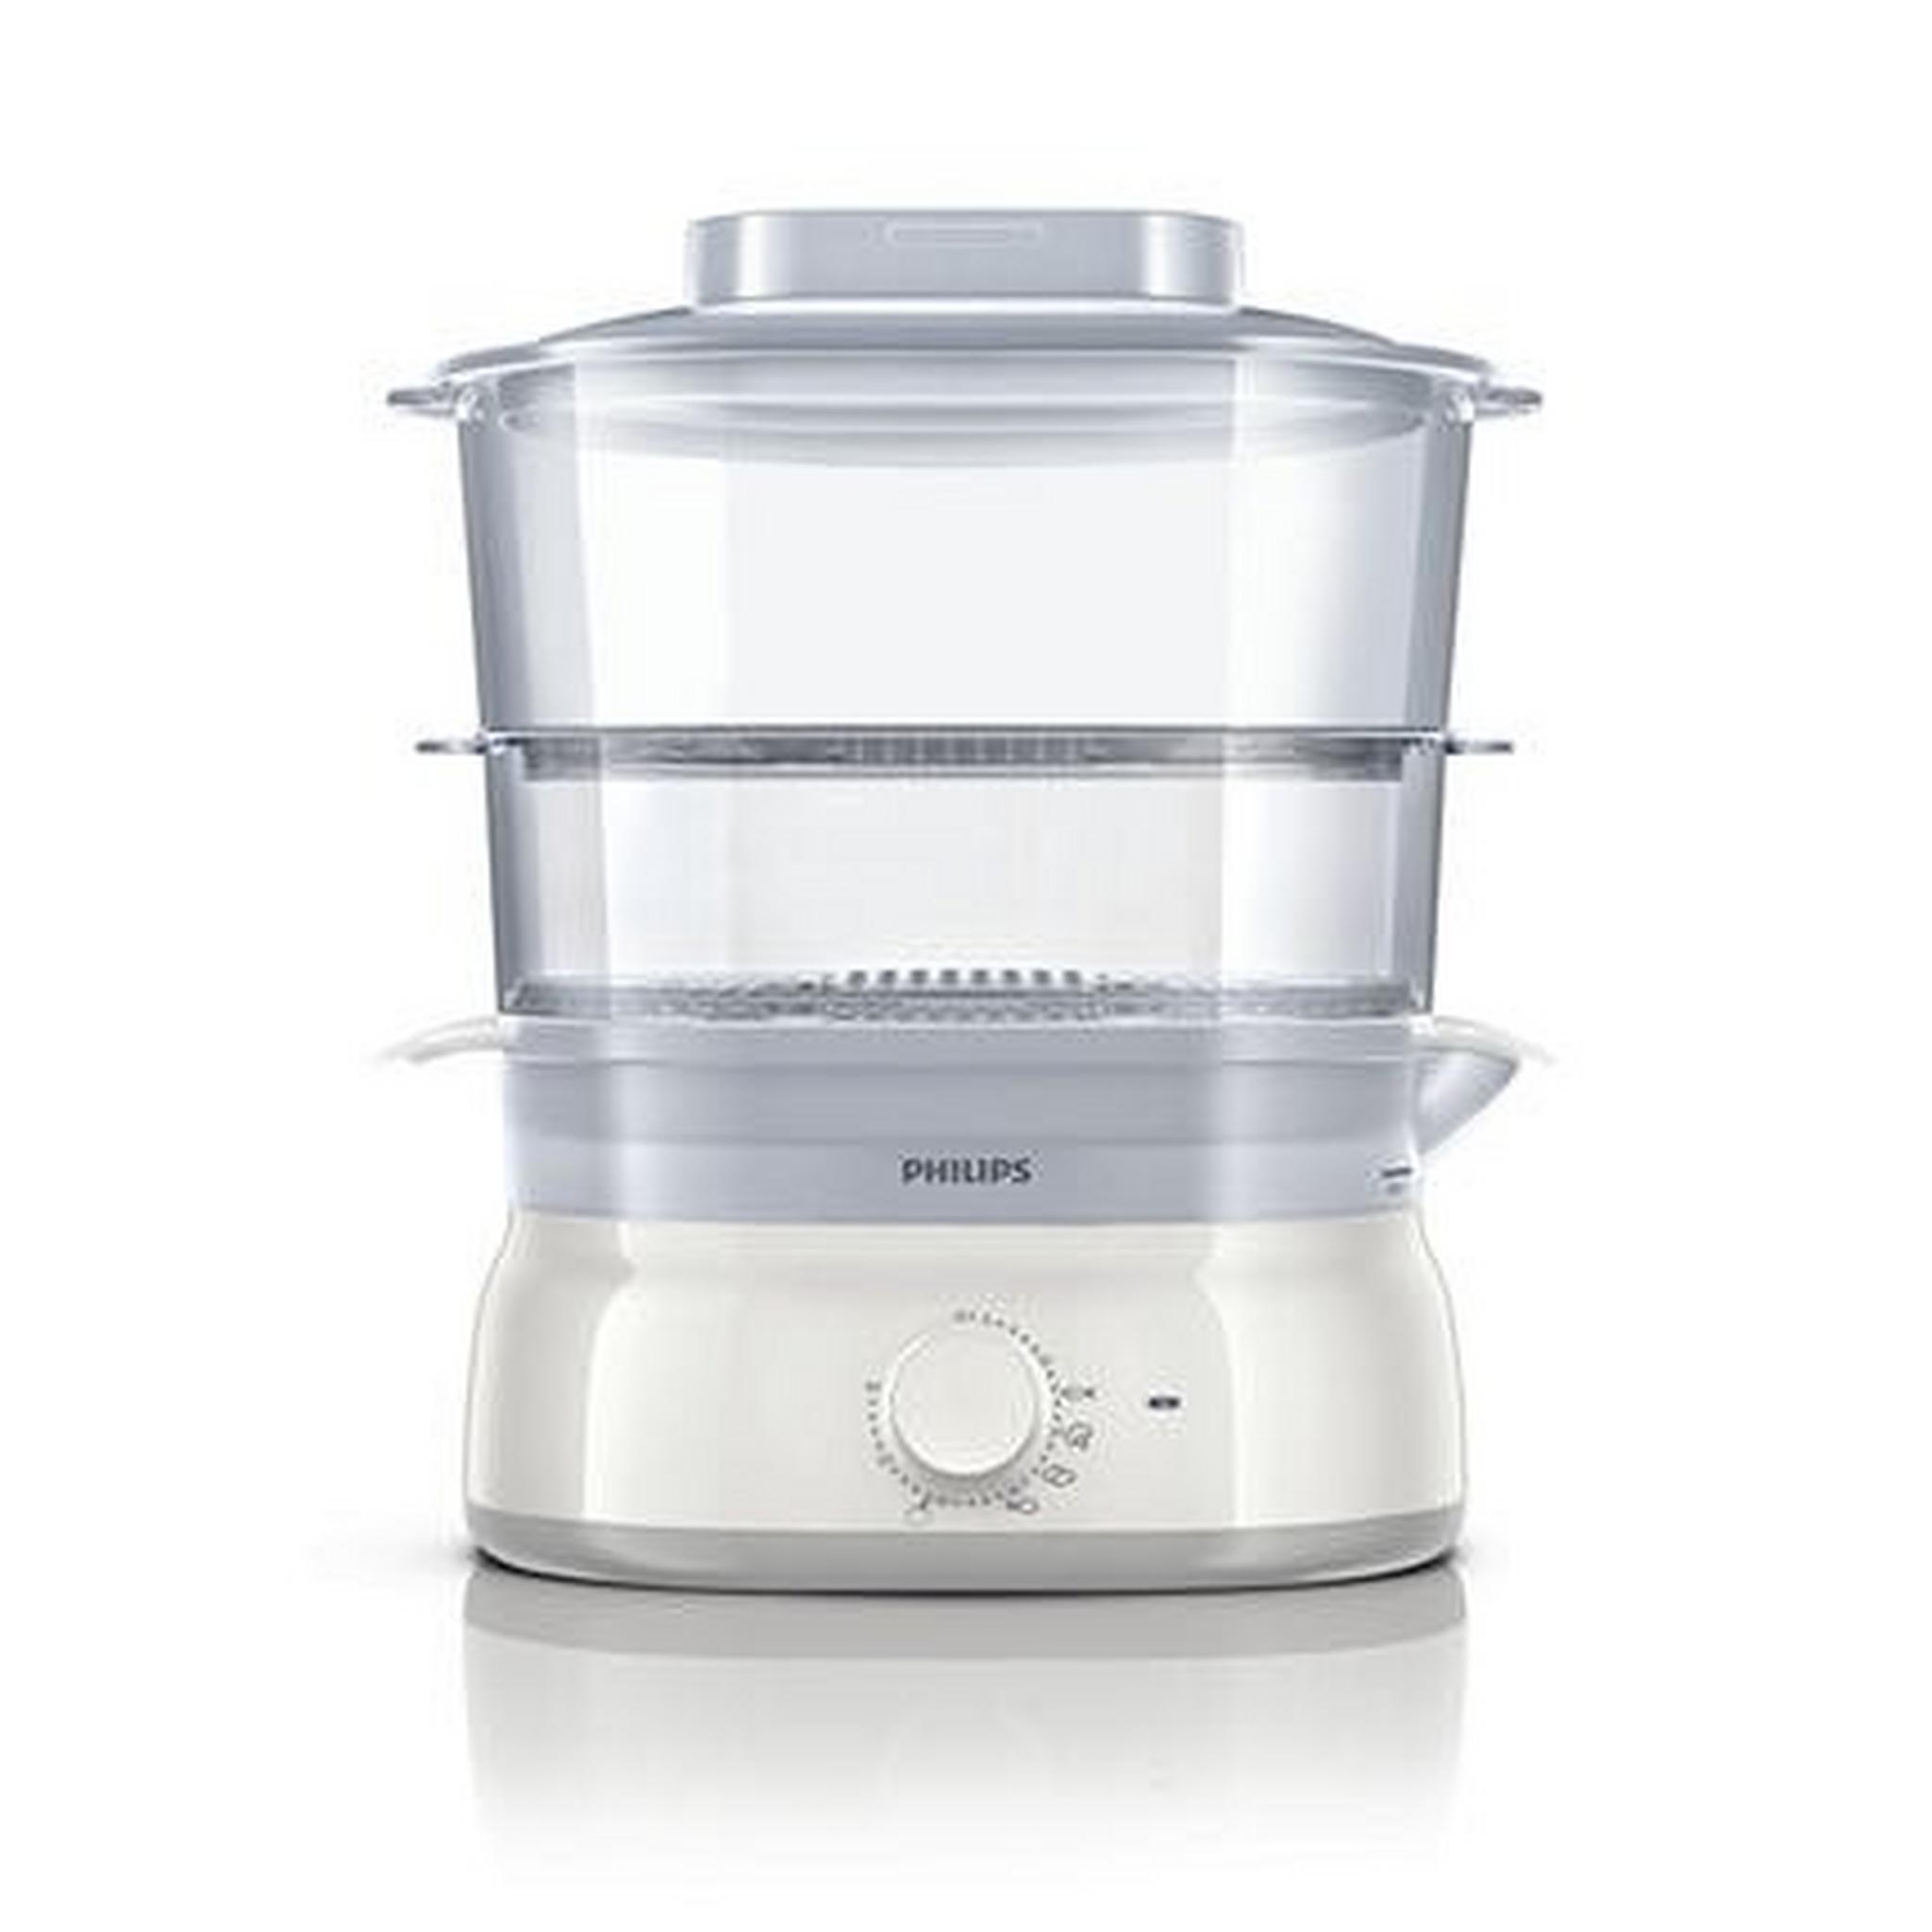 Philips Daily Collection Steamer 900W  5Litres - HD9115/01